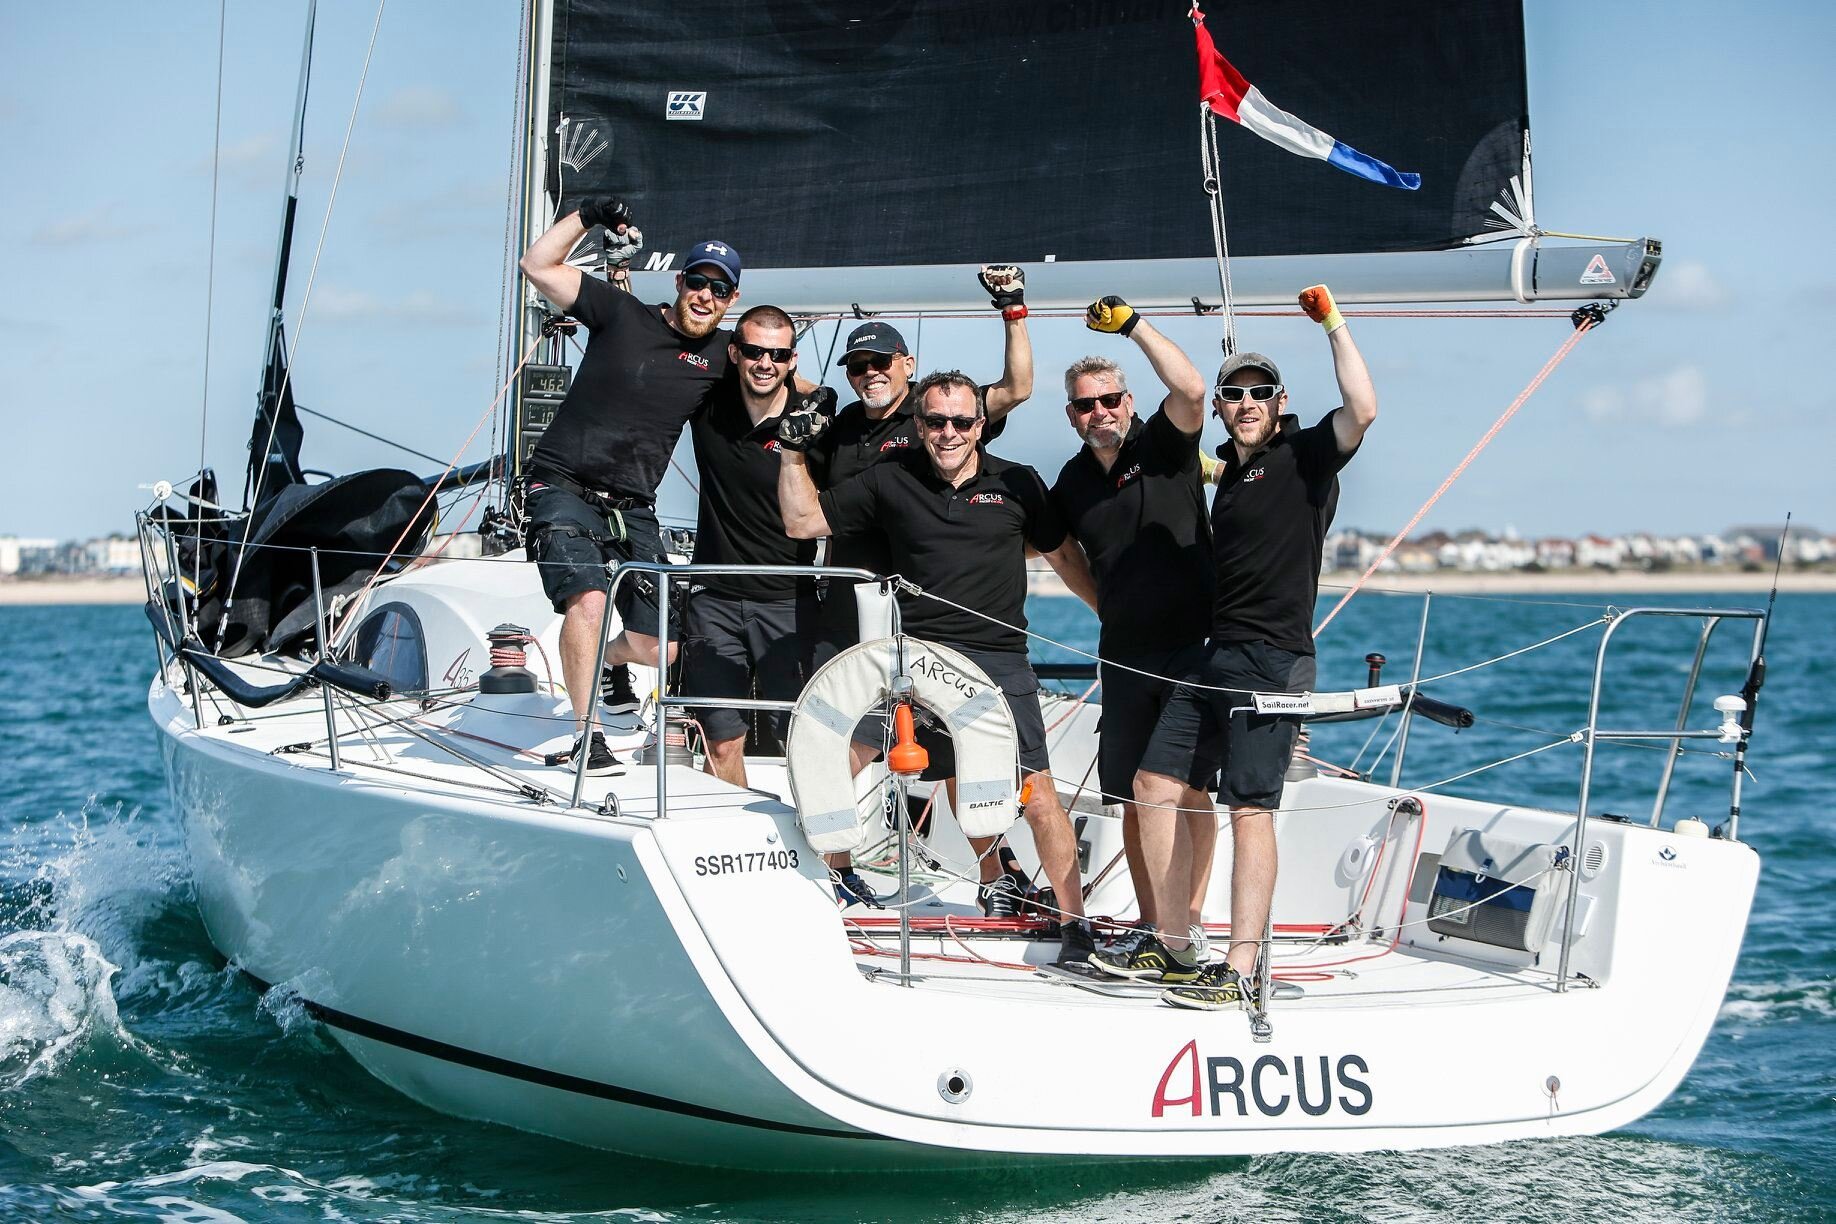 IRC UK National Championship: John Howell and Paul Newell’s A35 ARCUS won Class 3 as well as the overall title. Her upwind sails are Titanium and spinnakers are all UK Sailmakers Matrix cut.